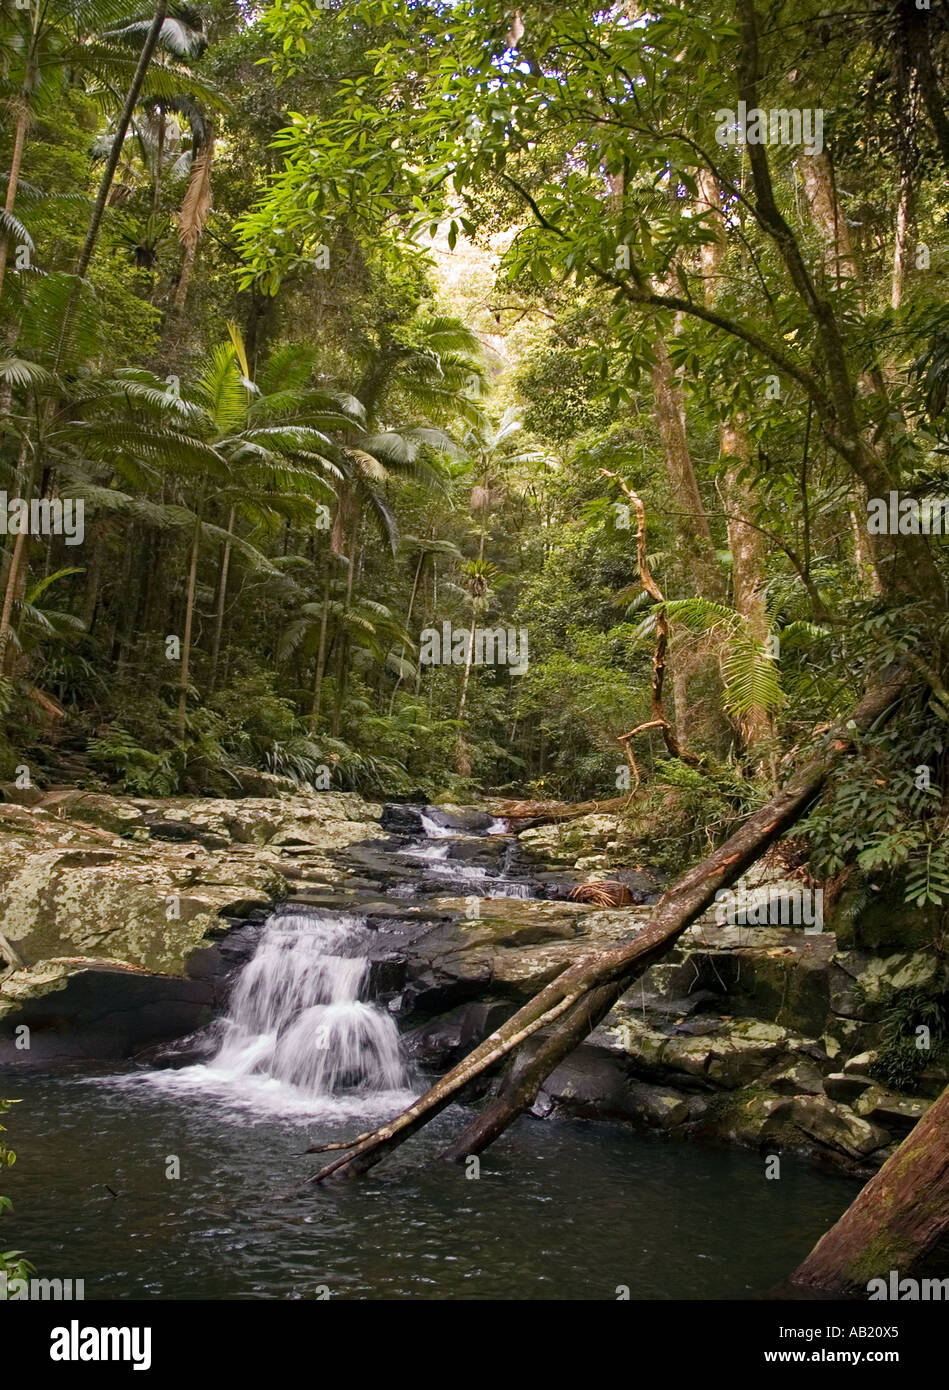 Stock photograph of a small waterfall on the Terania Creek, New South Wales, Australia. DSC 9110 Stock Photo